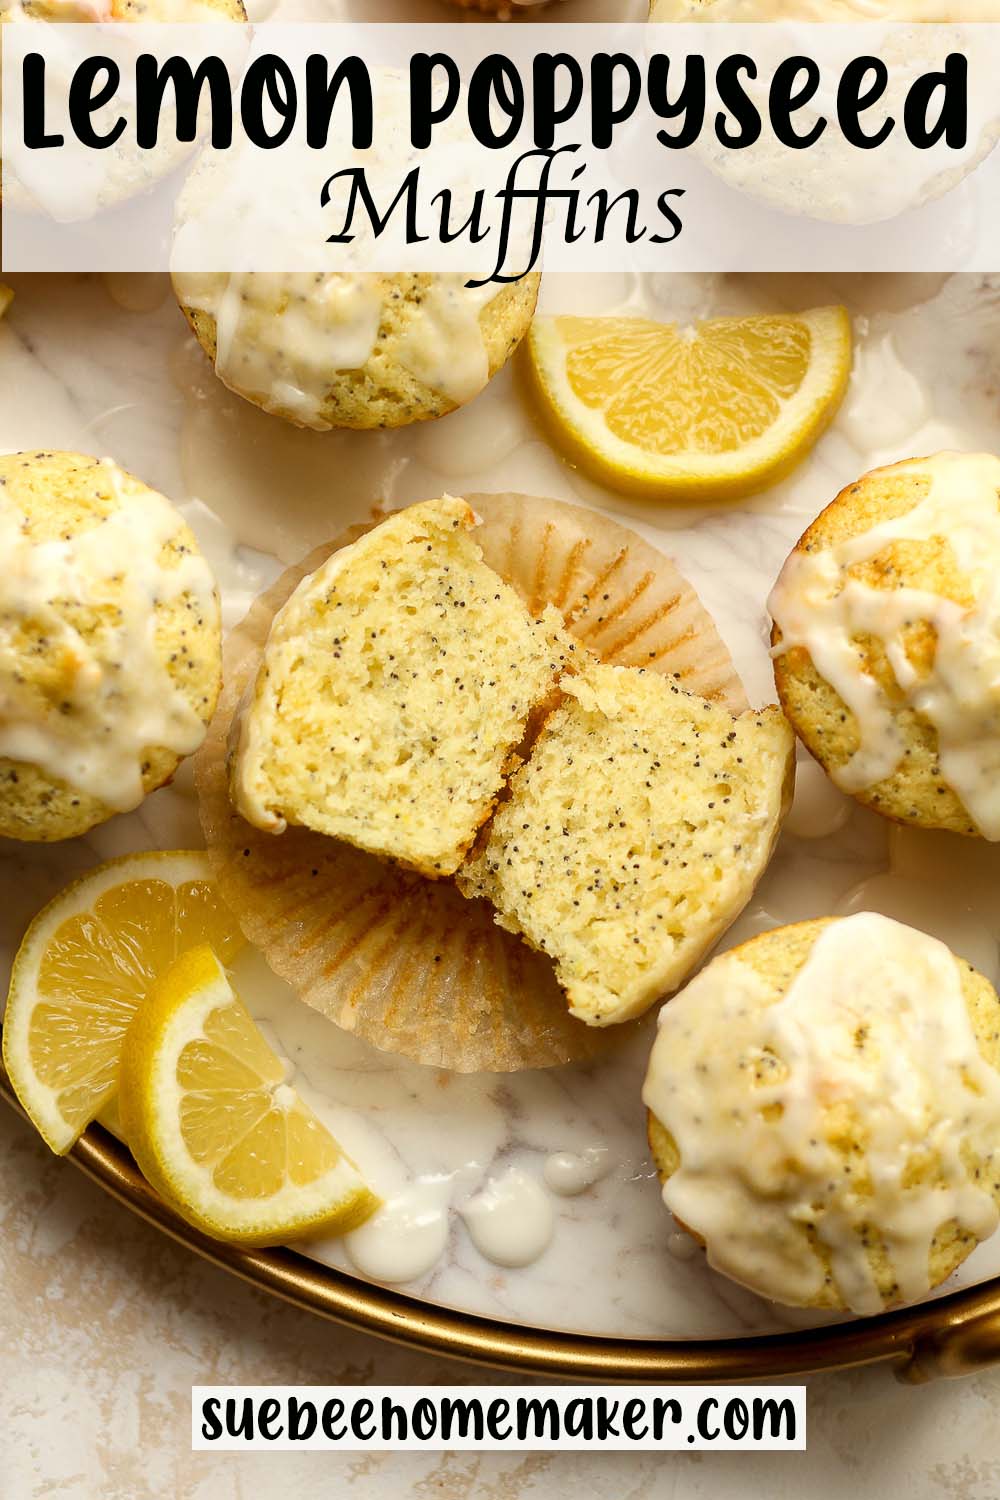 A tray of lemon poppyseed muffins with one split in half.